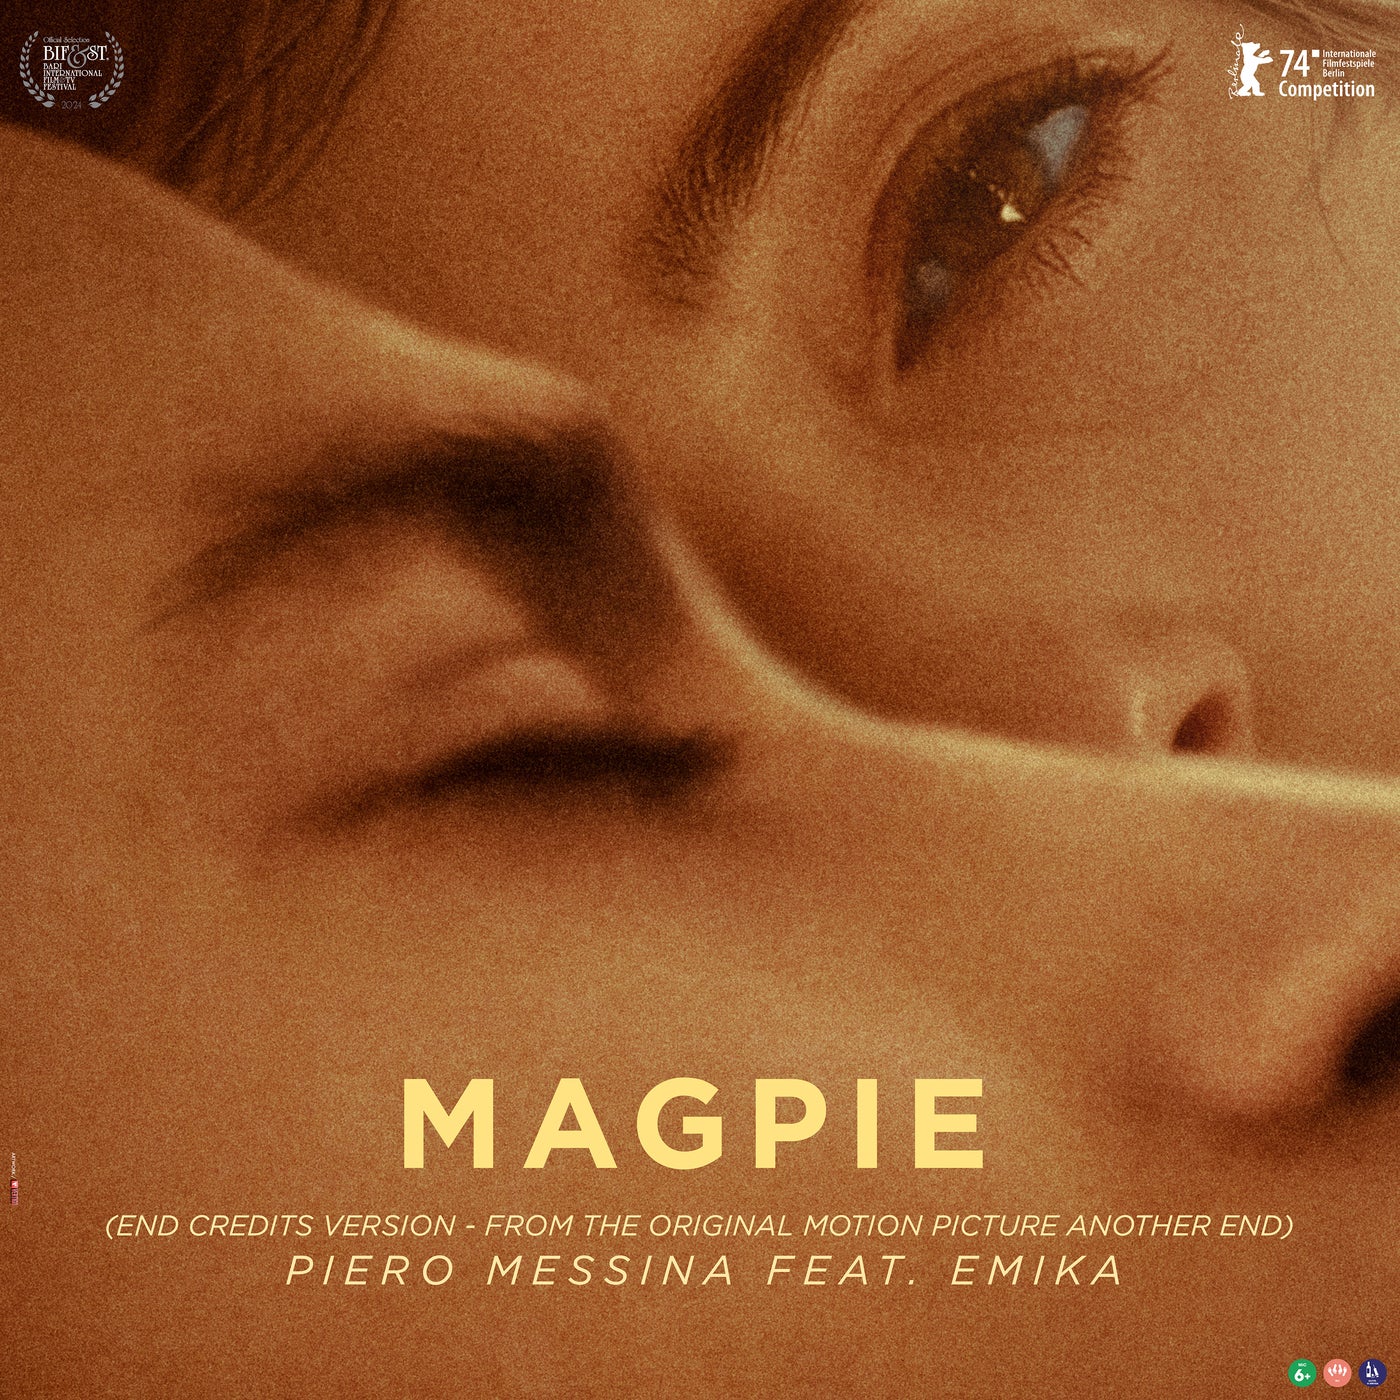 Piero Messina - Magpie (End Credits Version) feat. Emika (From the Original Motion Picture Soundtrack Another End)